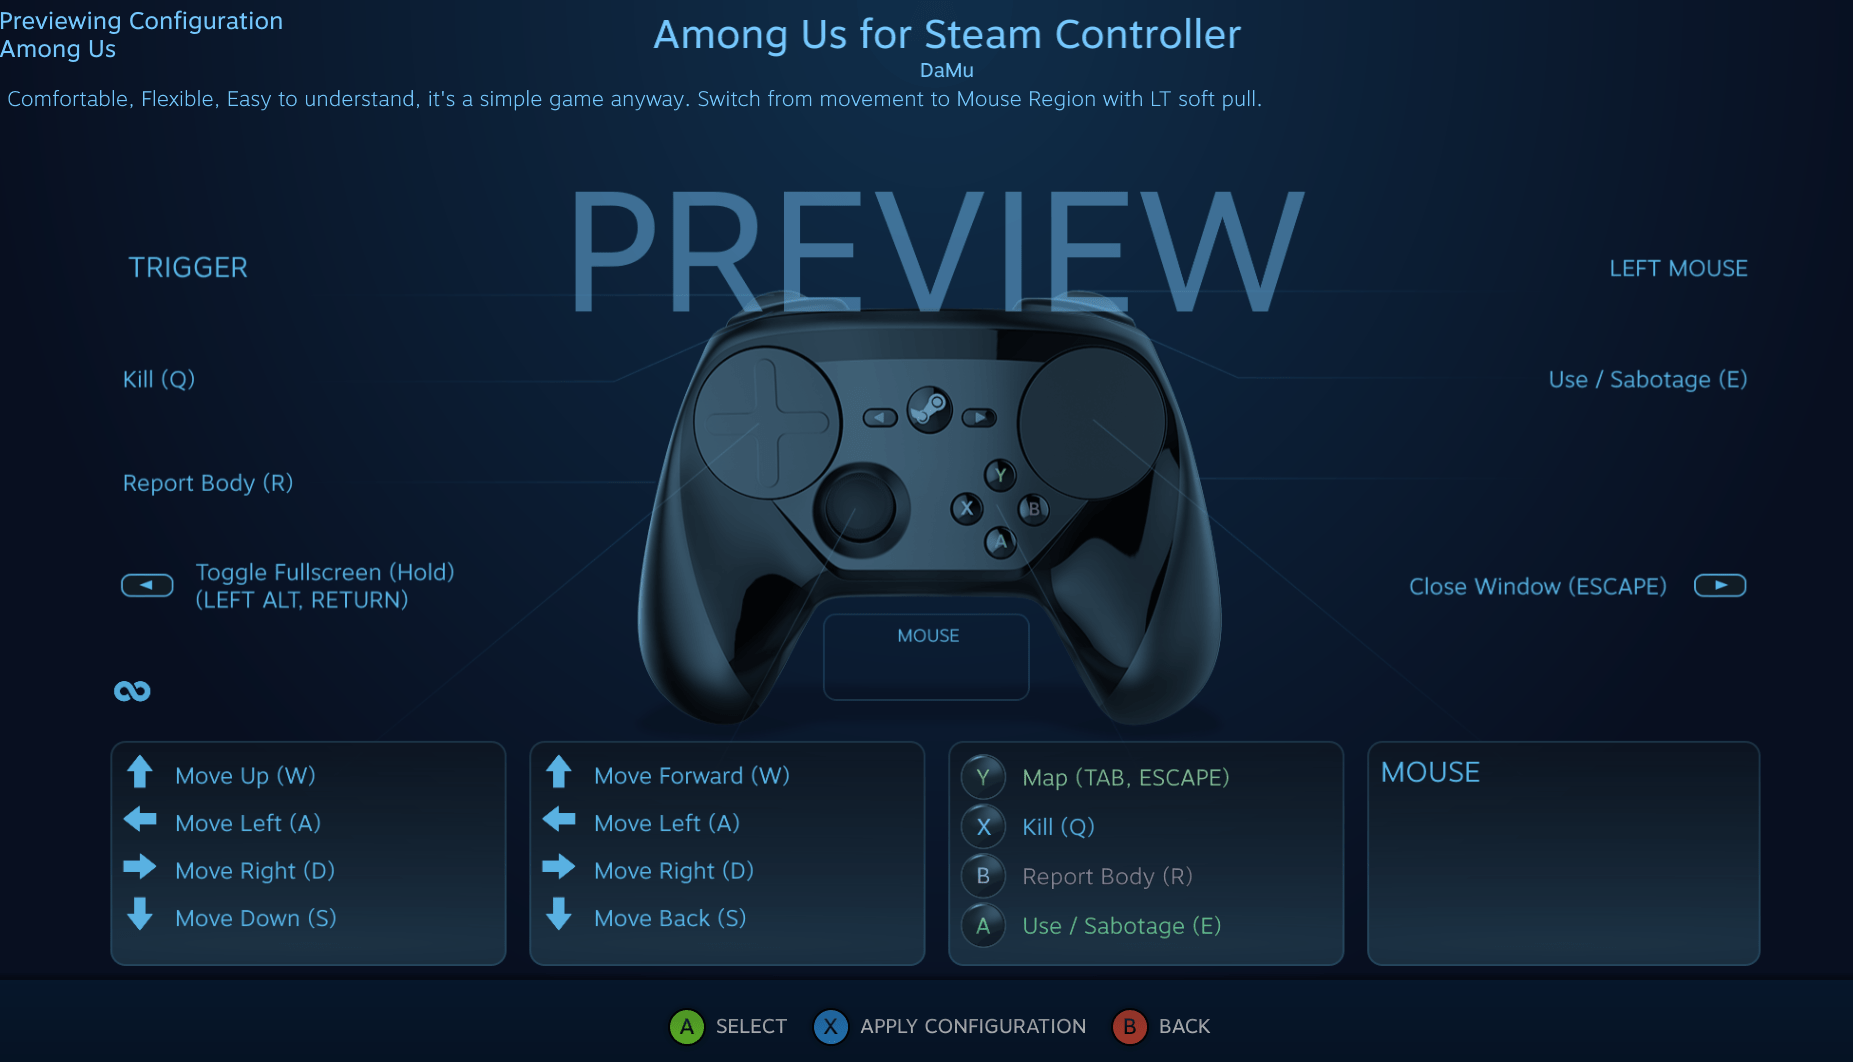 Among Us - Play with the Steam Controller